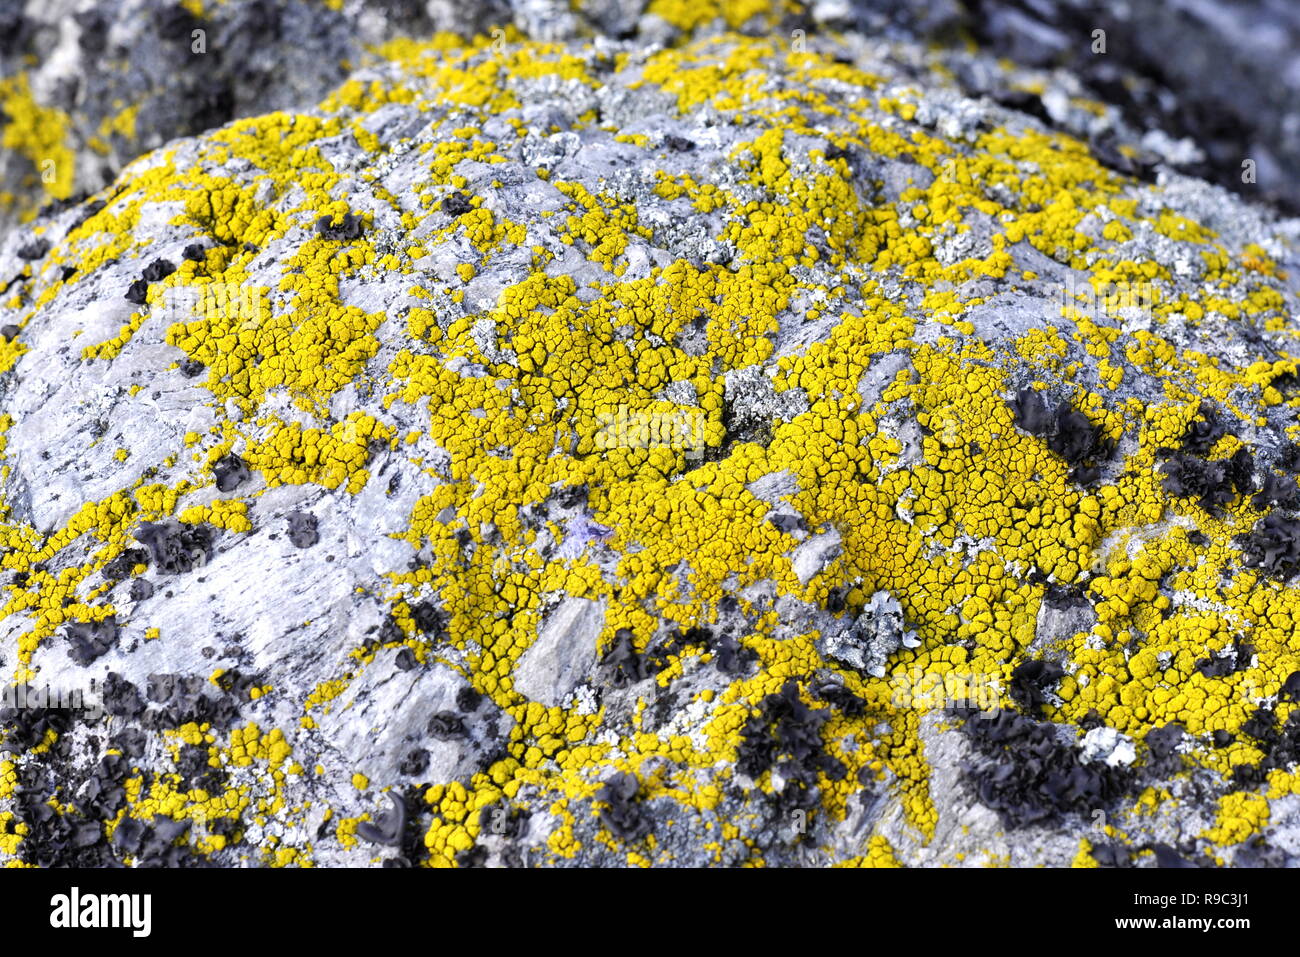 Yellow lichen of the genus Candellaria growing on a stone Stock Photo